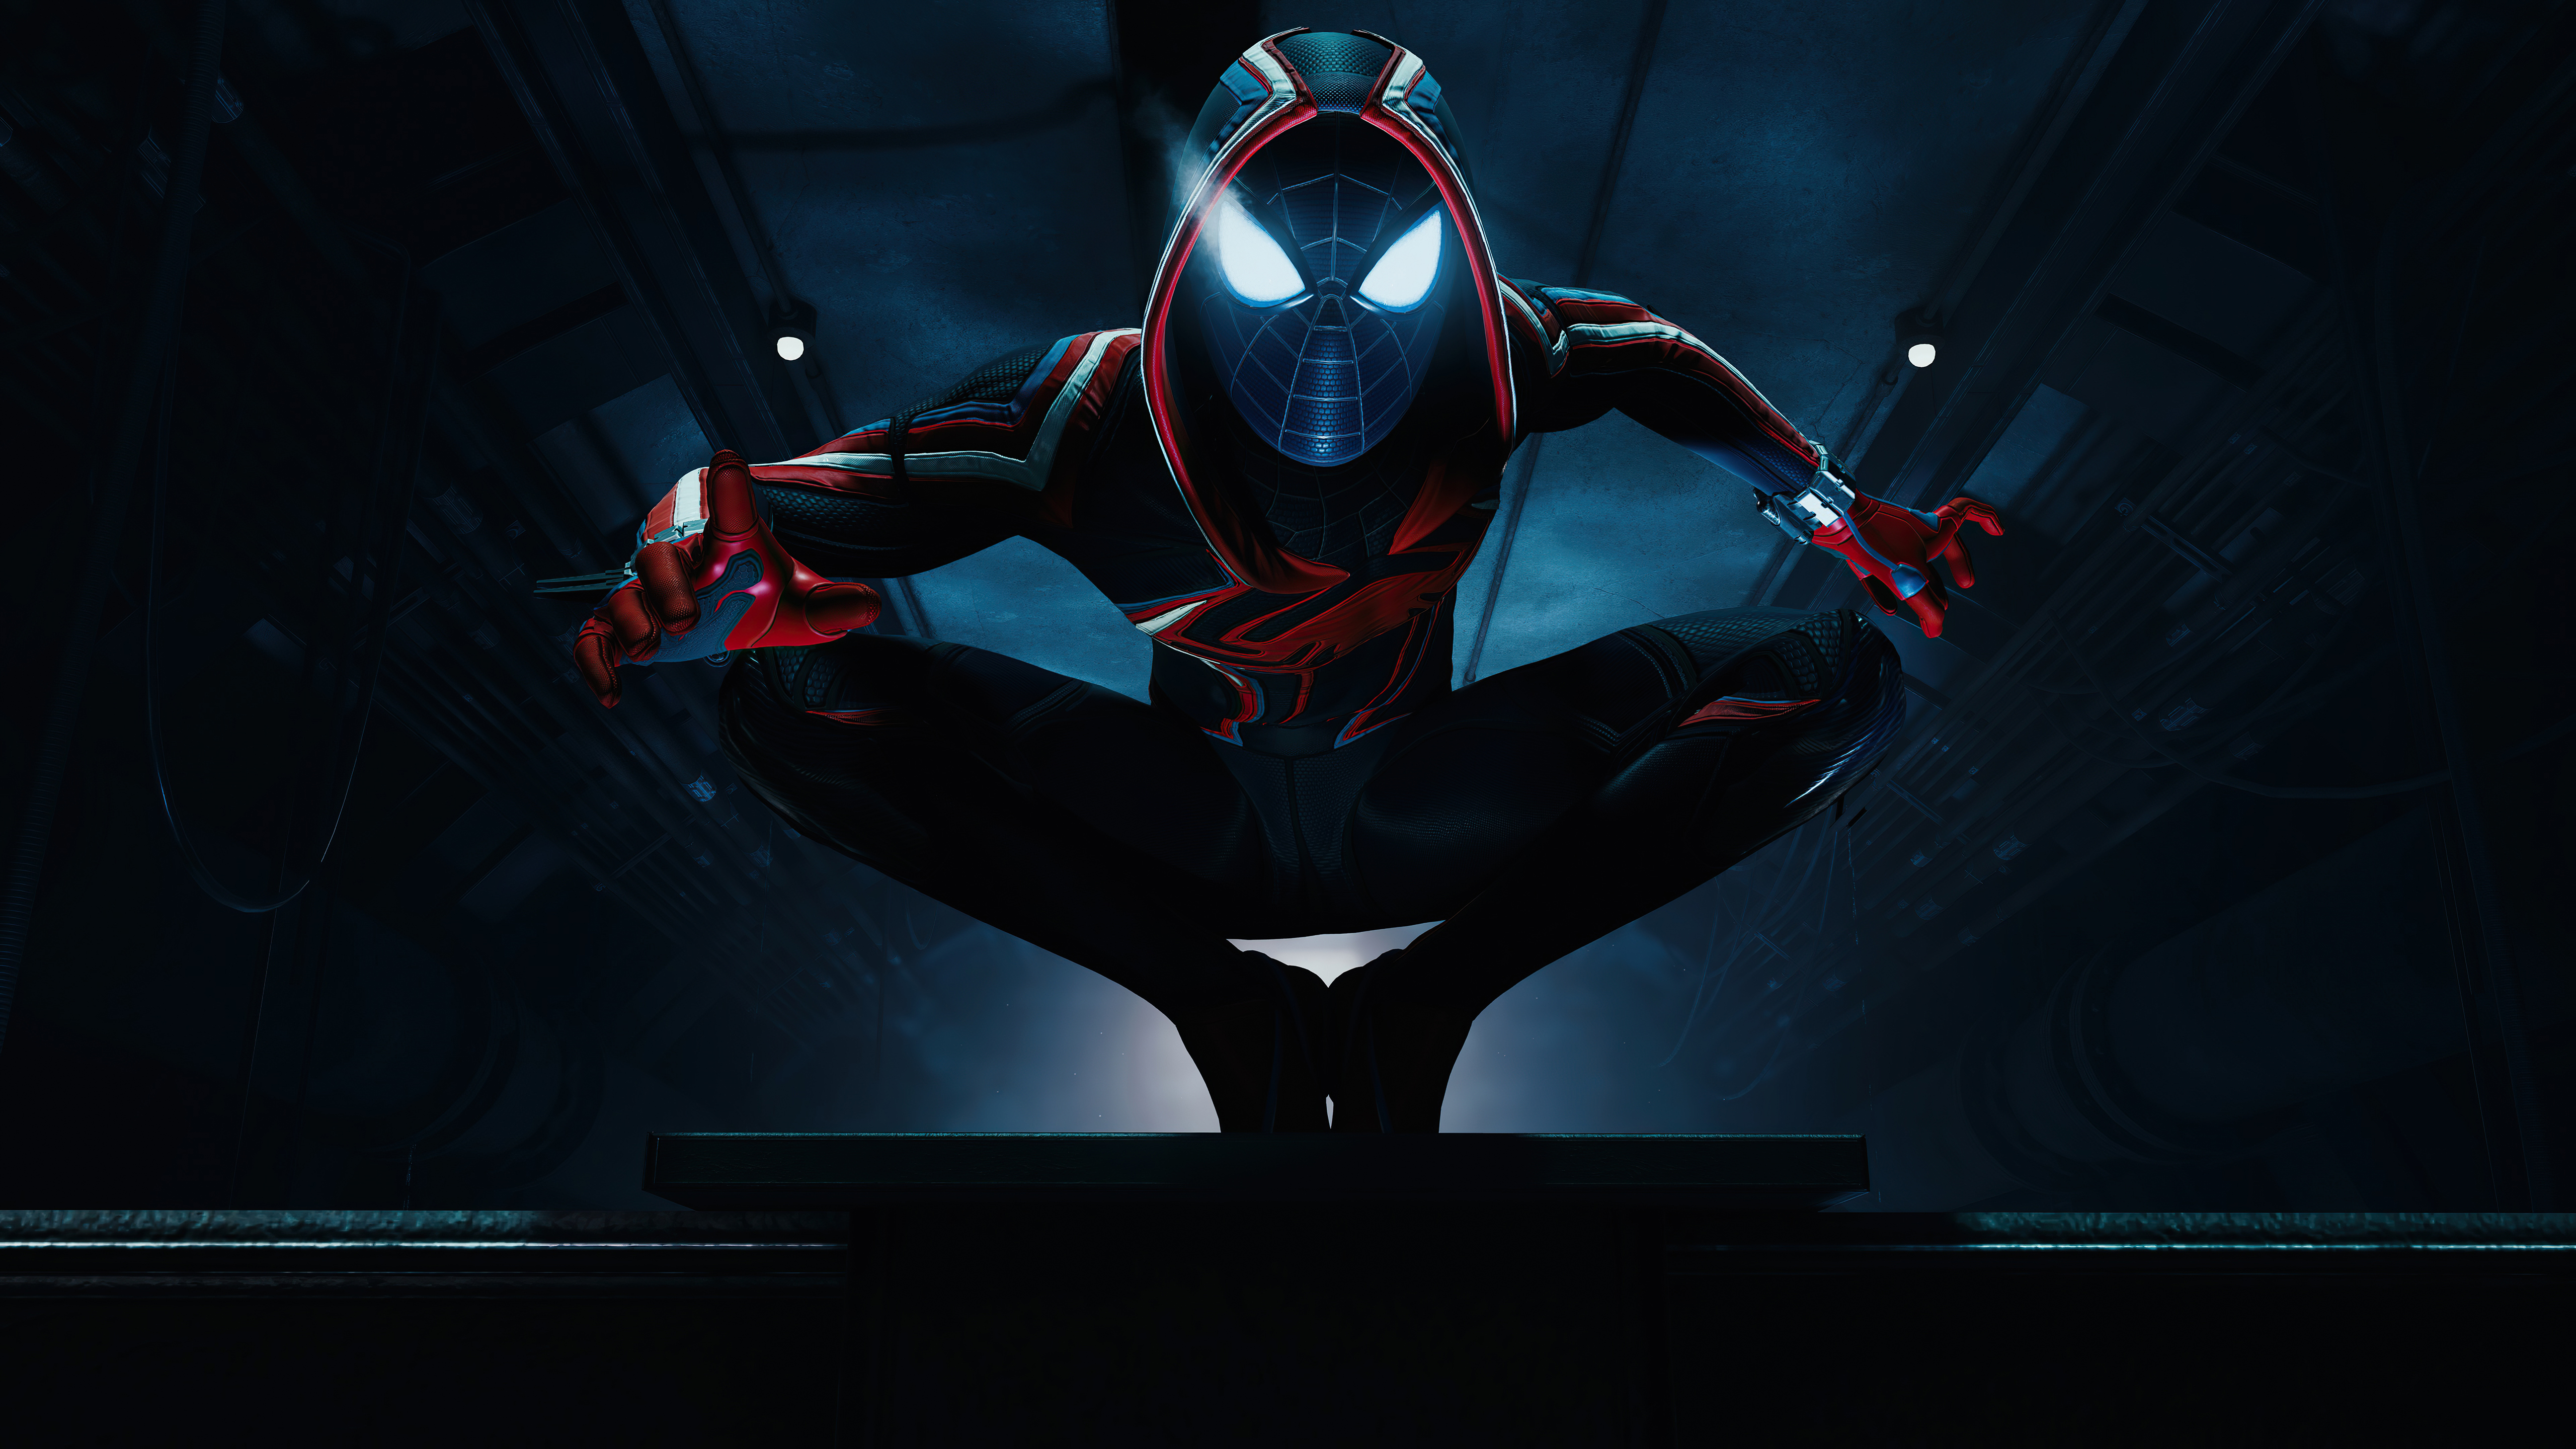 Download wallpaper 1280x2120 spiderverse miles morale movie fan art  iphone 6 plus 1280x2120 hd background 19389